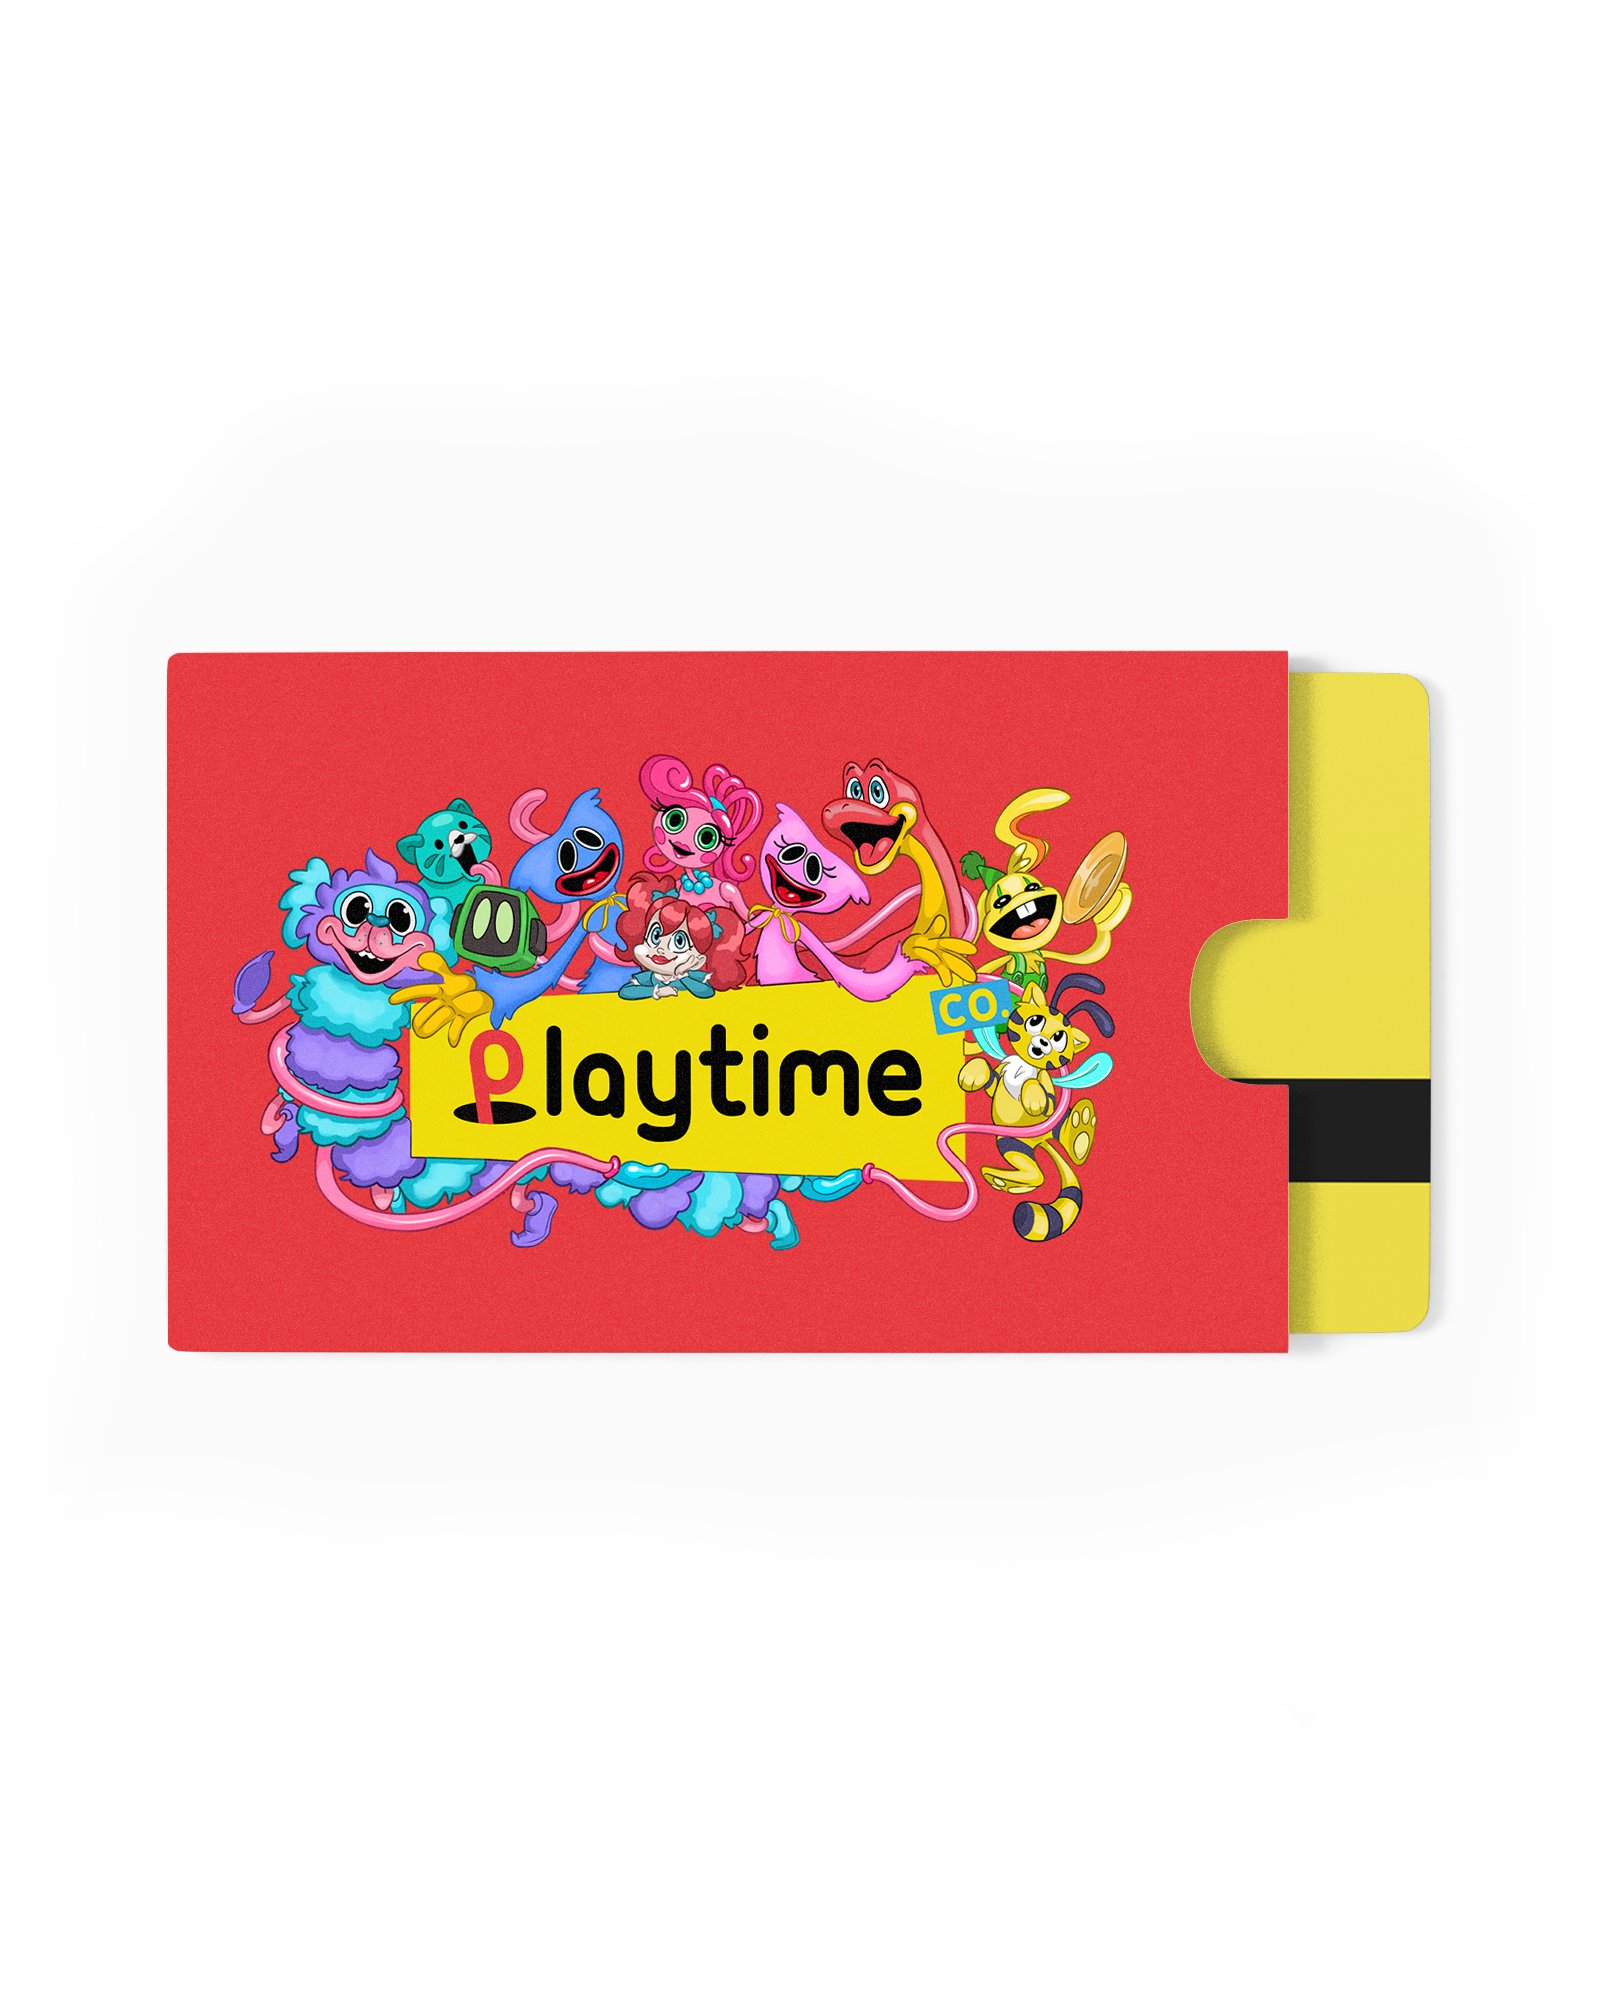 The Official Poppy Playtime Store – Poppy Playtime Official Store